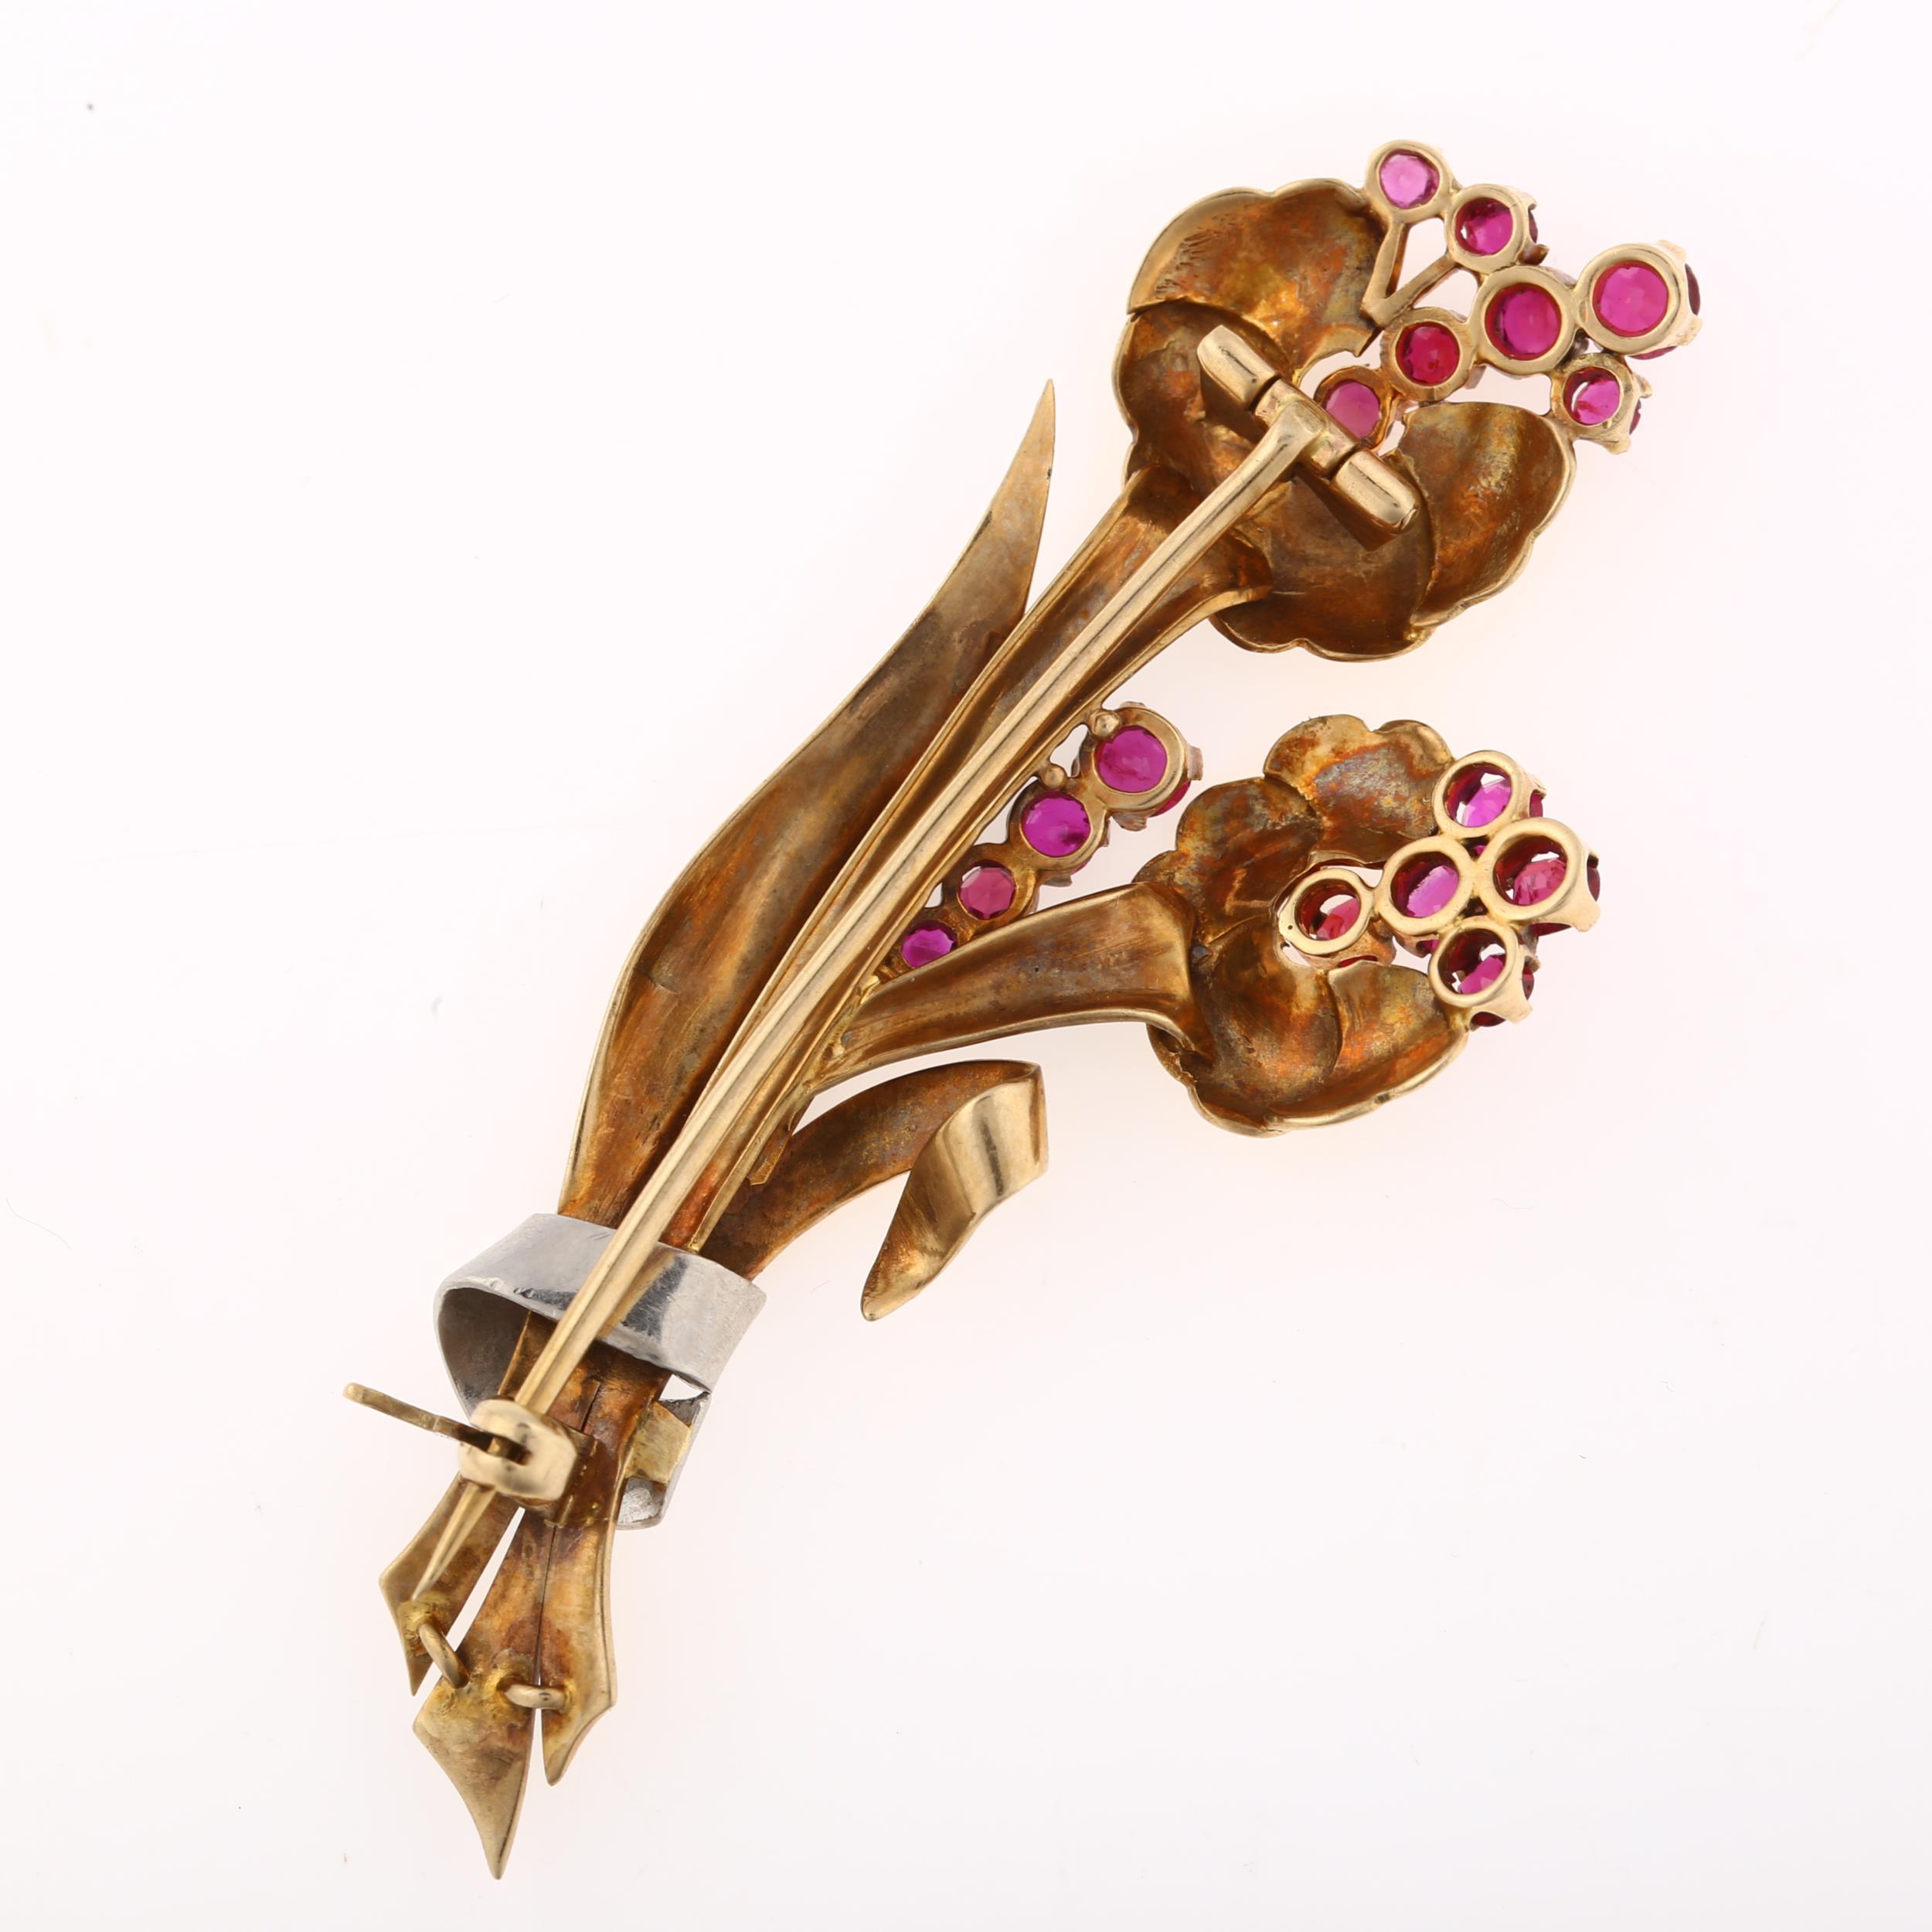 A late Art Deco French ruby floral spray brooch, circa 1940, unmarked yellow and white gold settings - Image 3 of 4